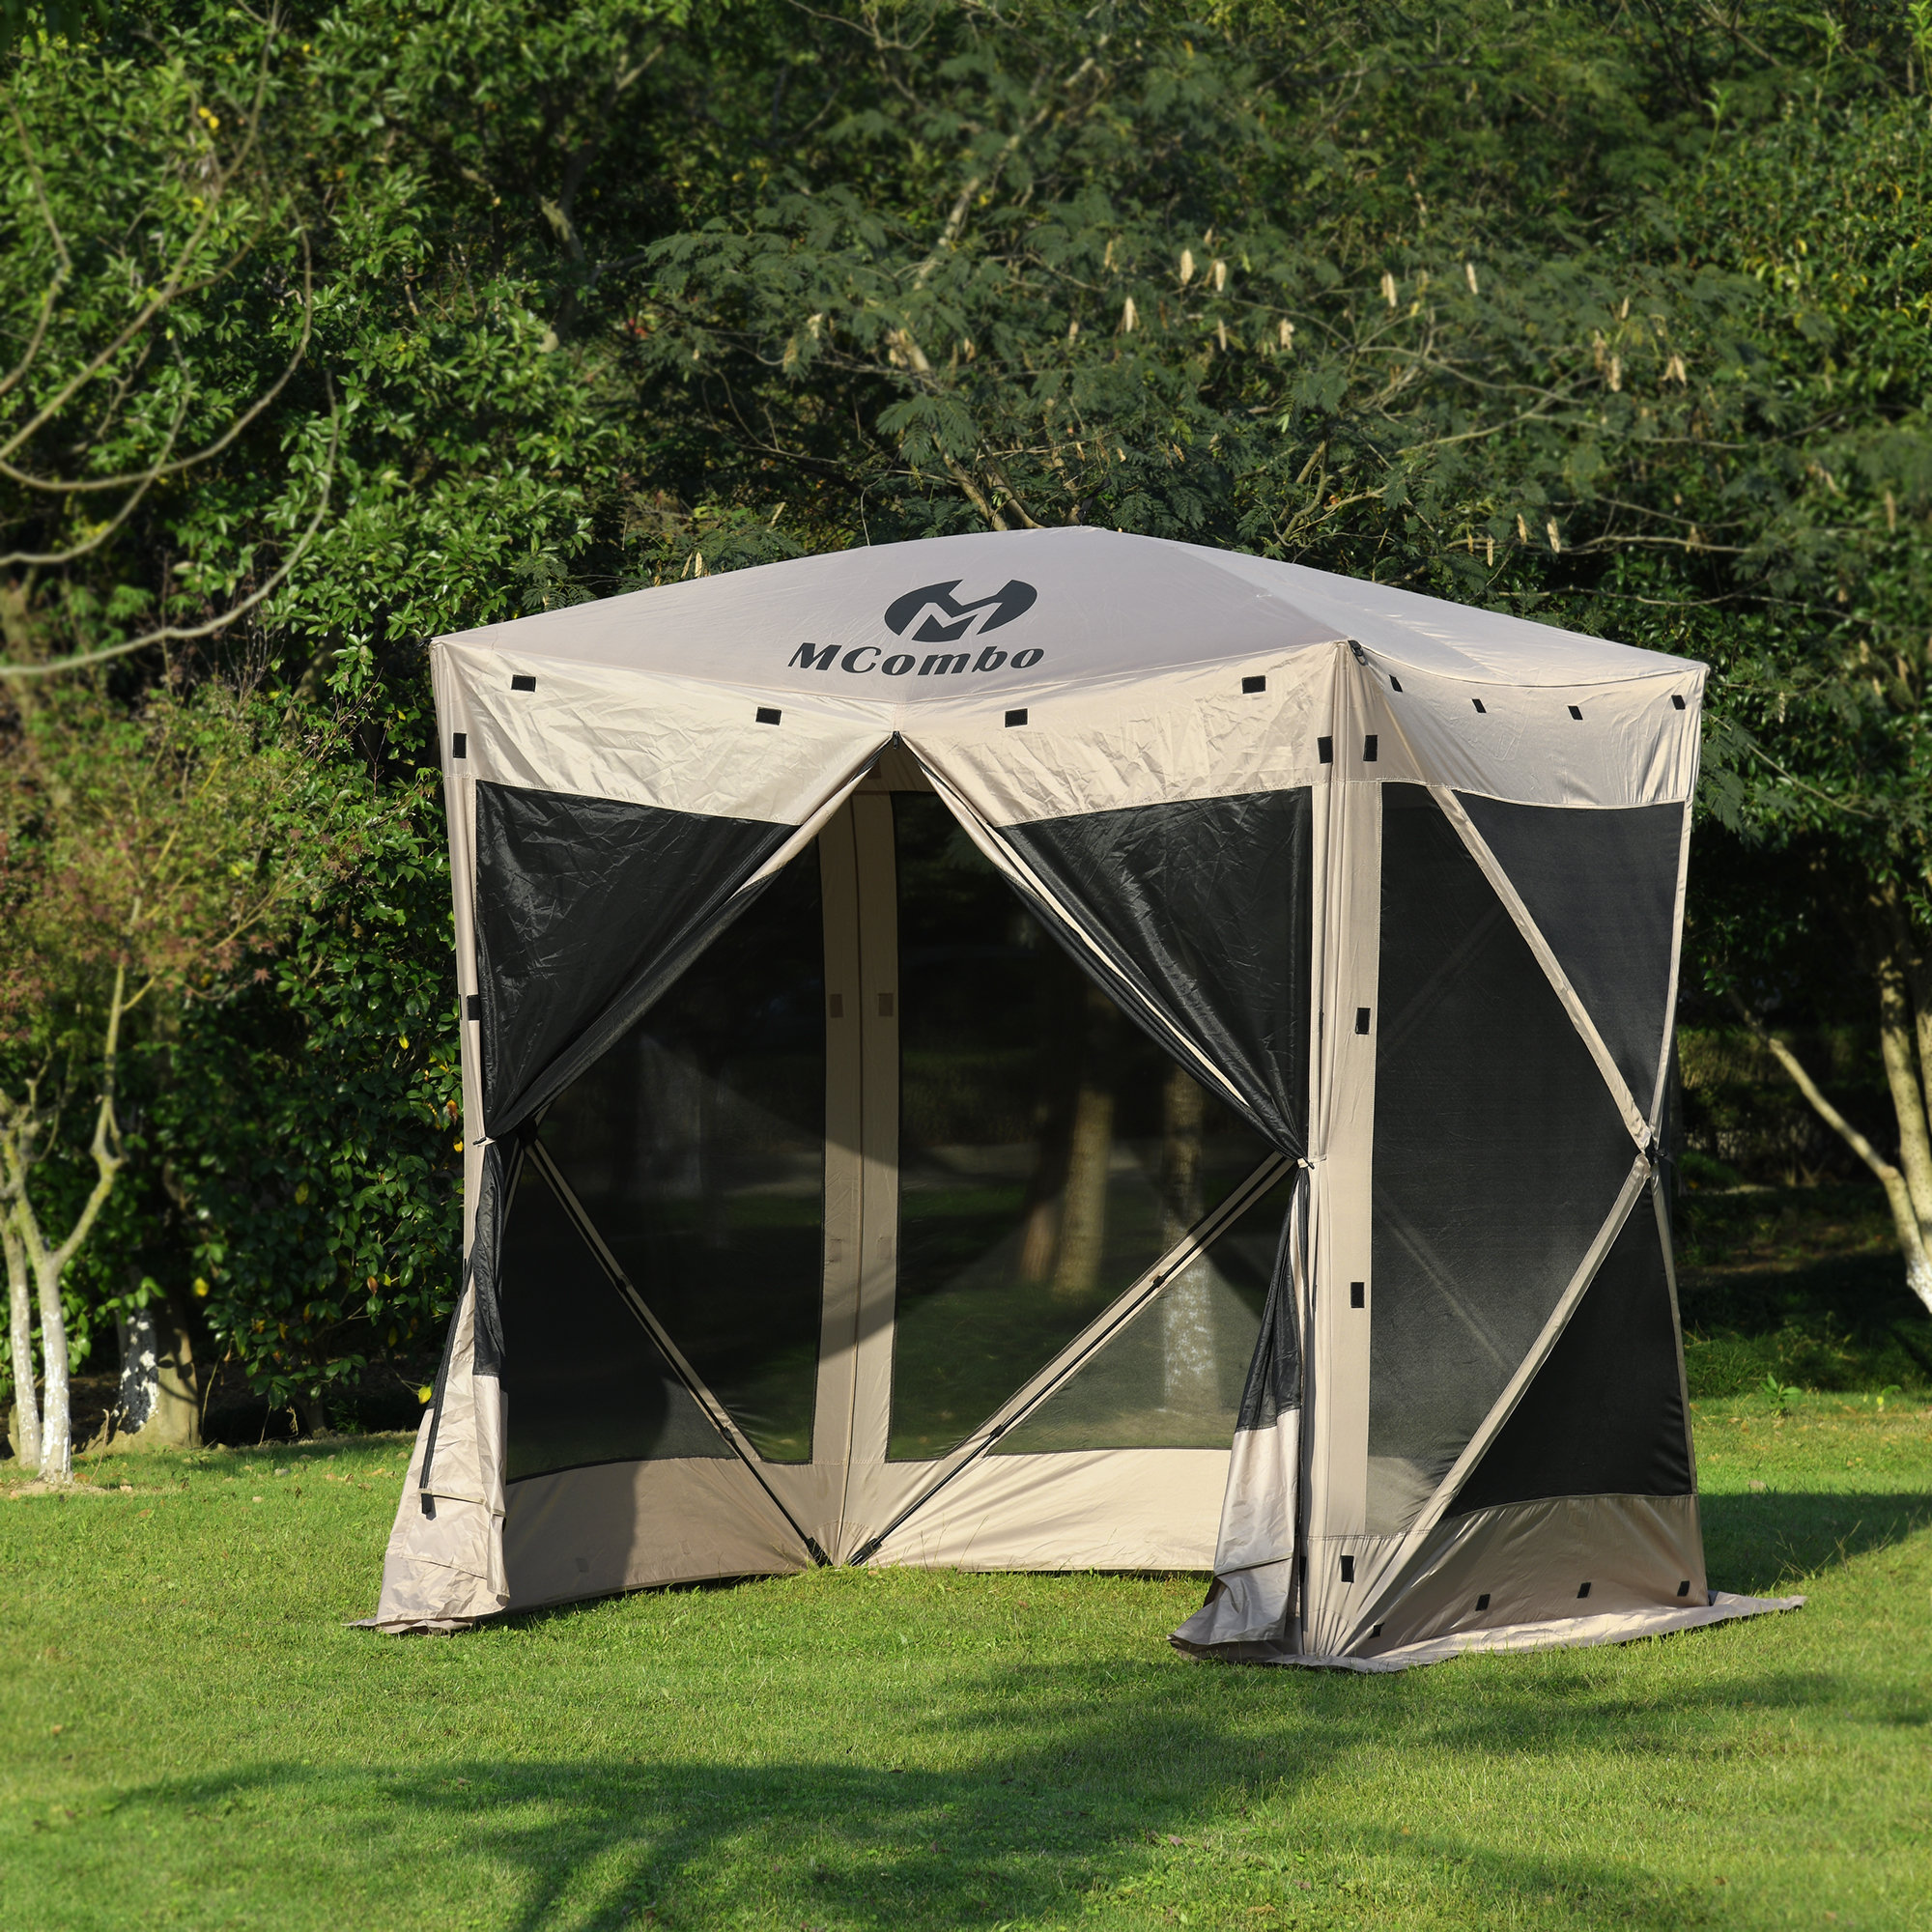 Outdoor Anti-Mosquito Tent,Personal Screen Tent,Canopy Gazebos for Patios Outdoor Camping Activities and Fishing 